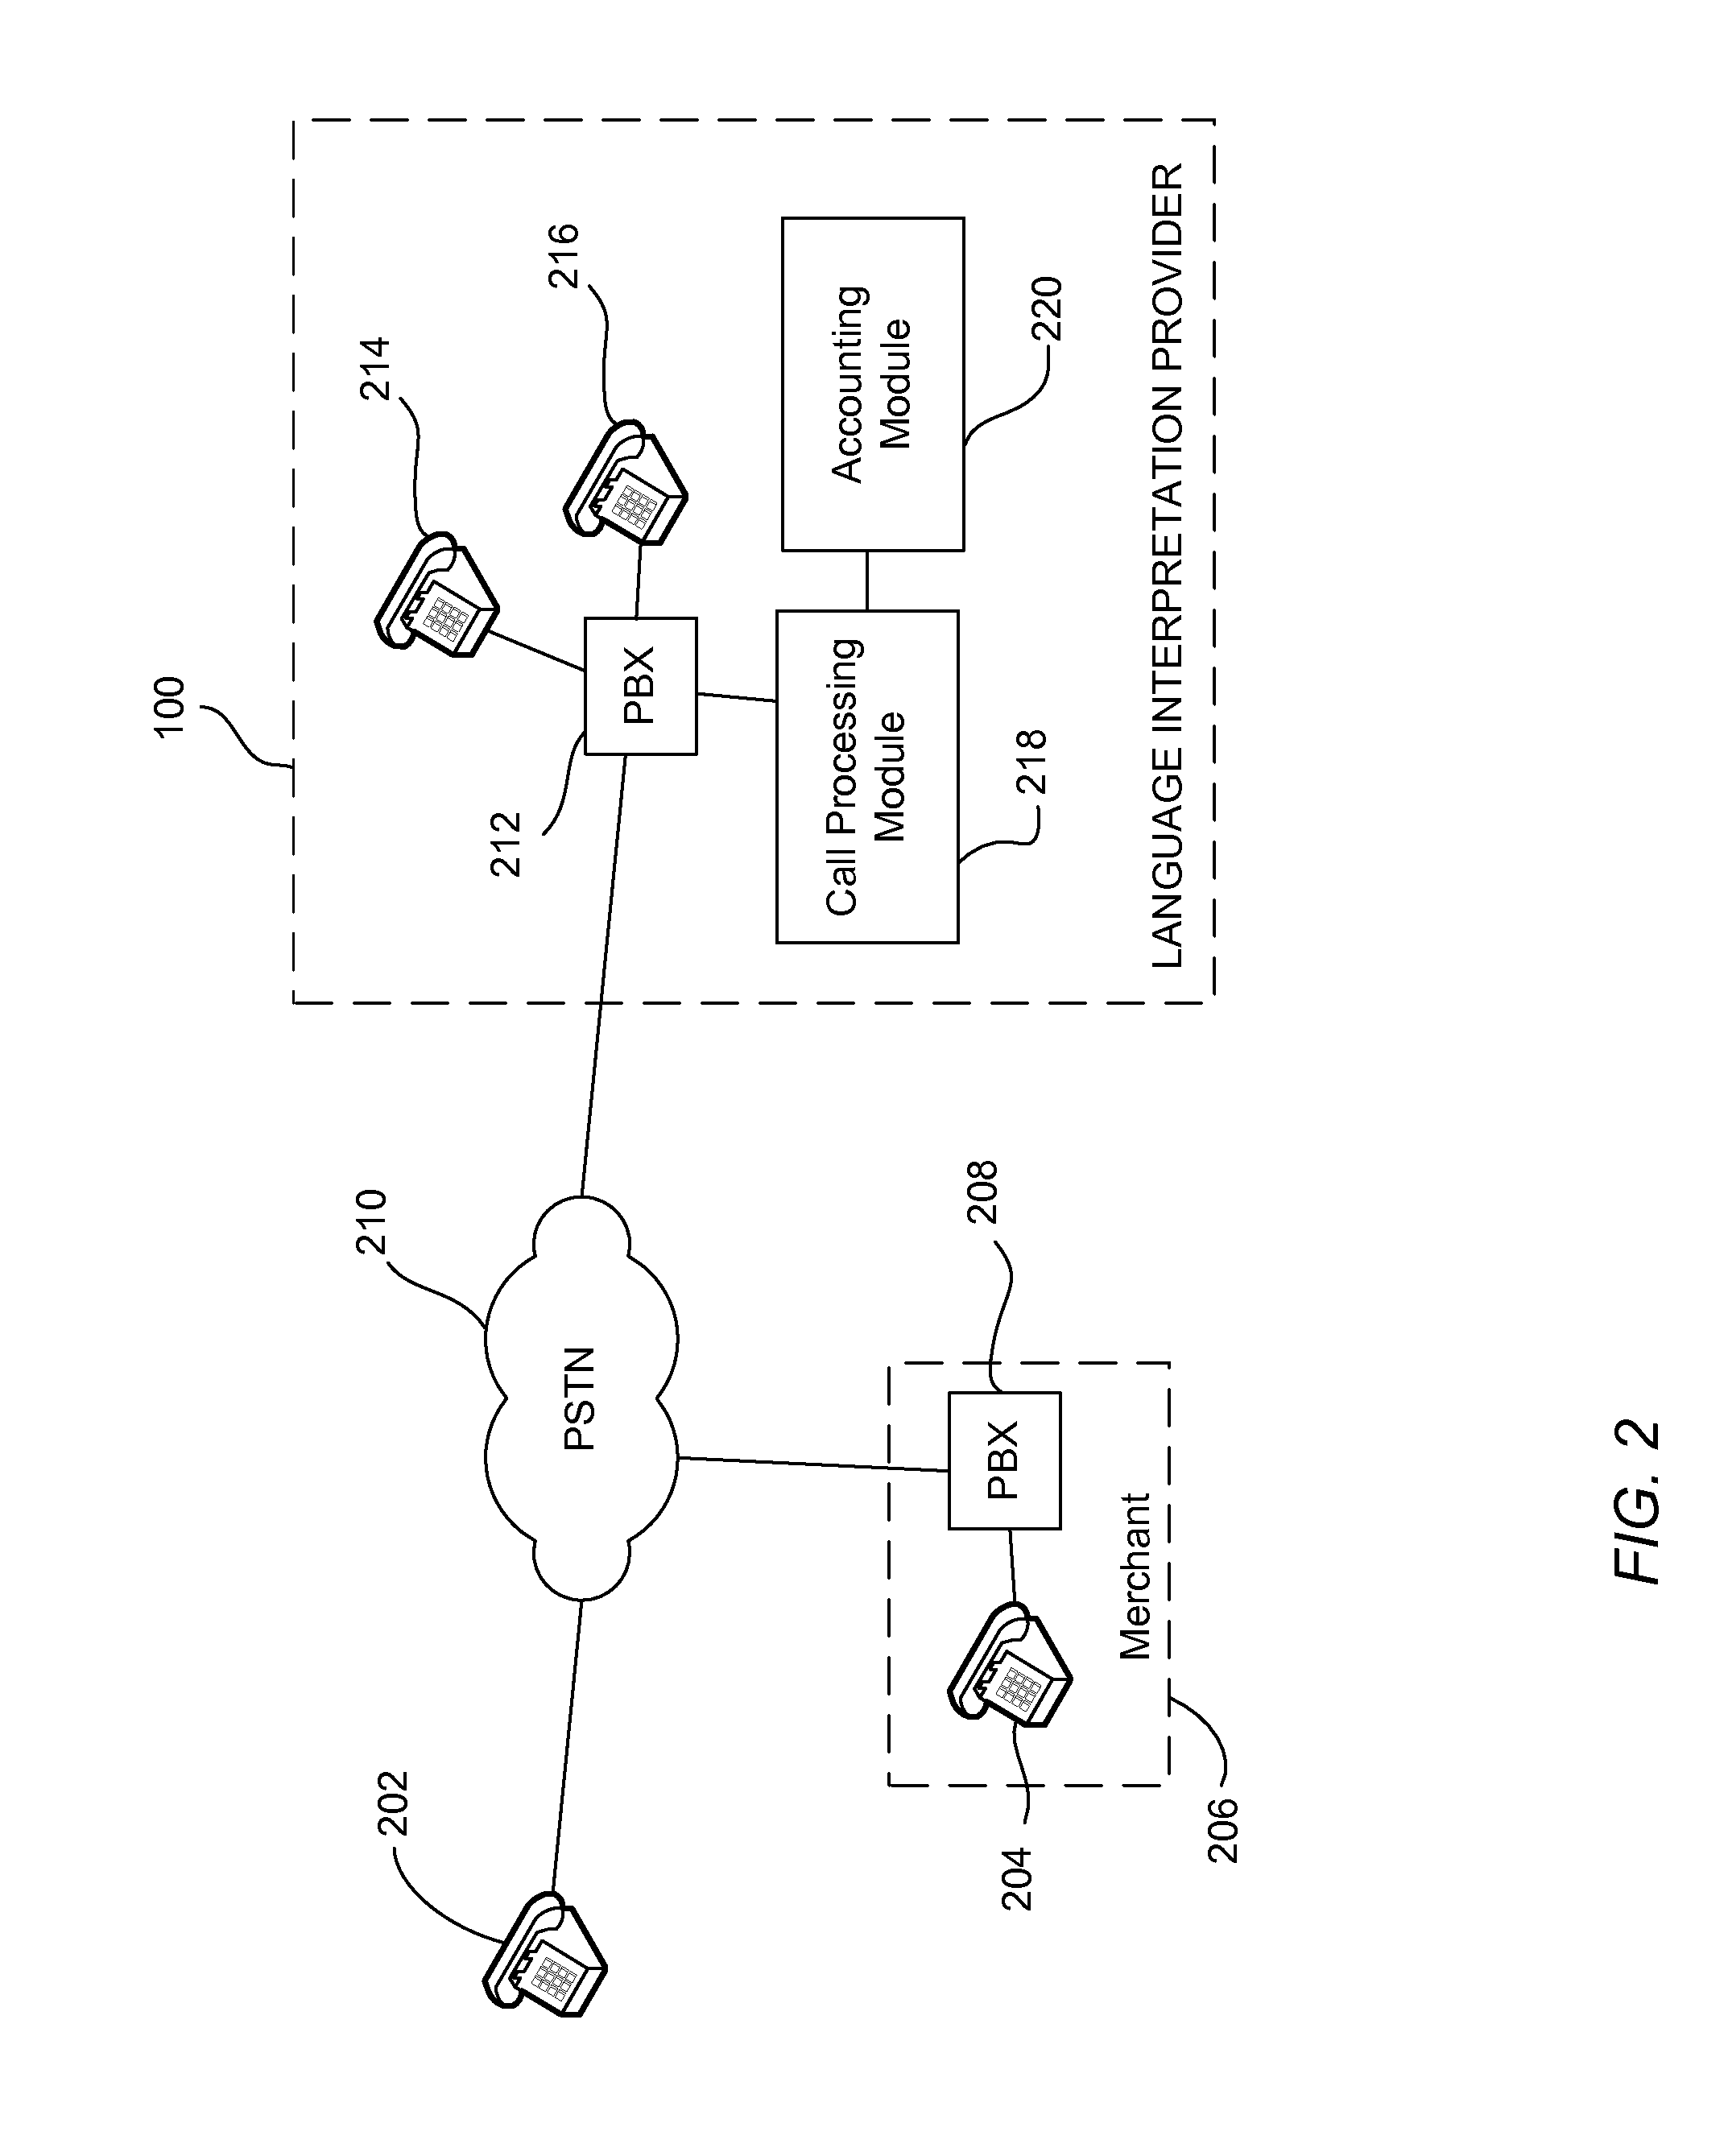 Systems and methods for providing relayed language interpretation